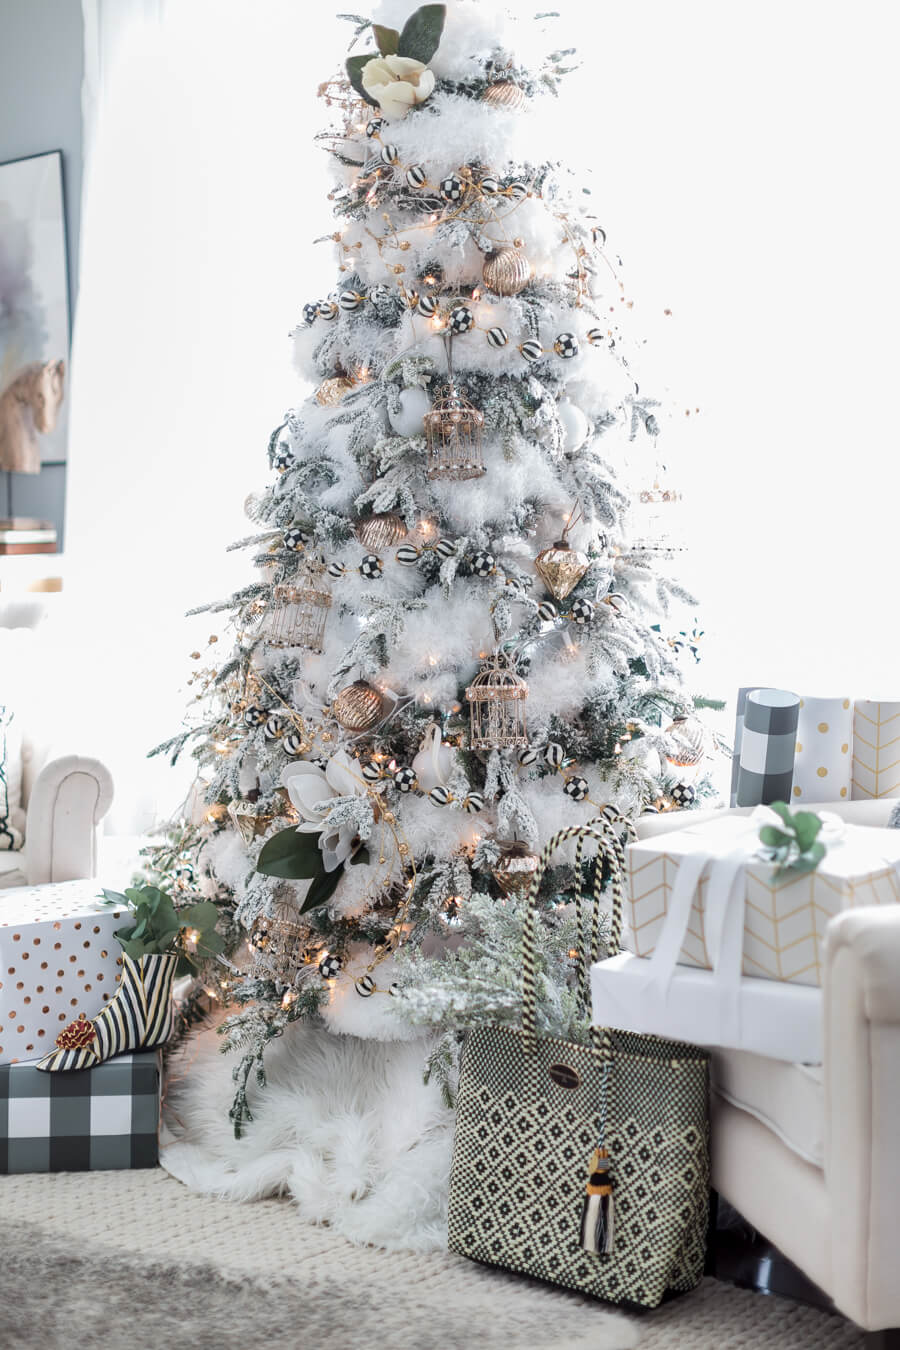 Black and White Christmas Tree | Best Way to Decorate Christmas Trees on a Budget: Inexpensive or Free & Easy Holiday Ornaments & Decorations